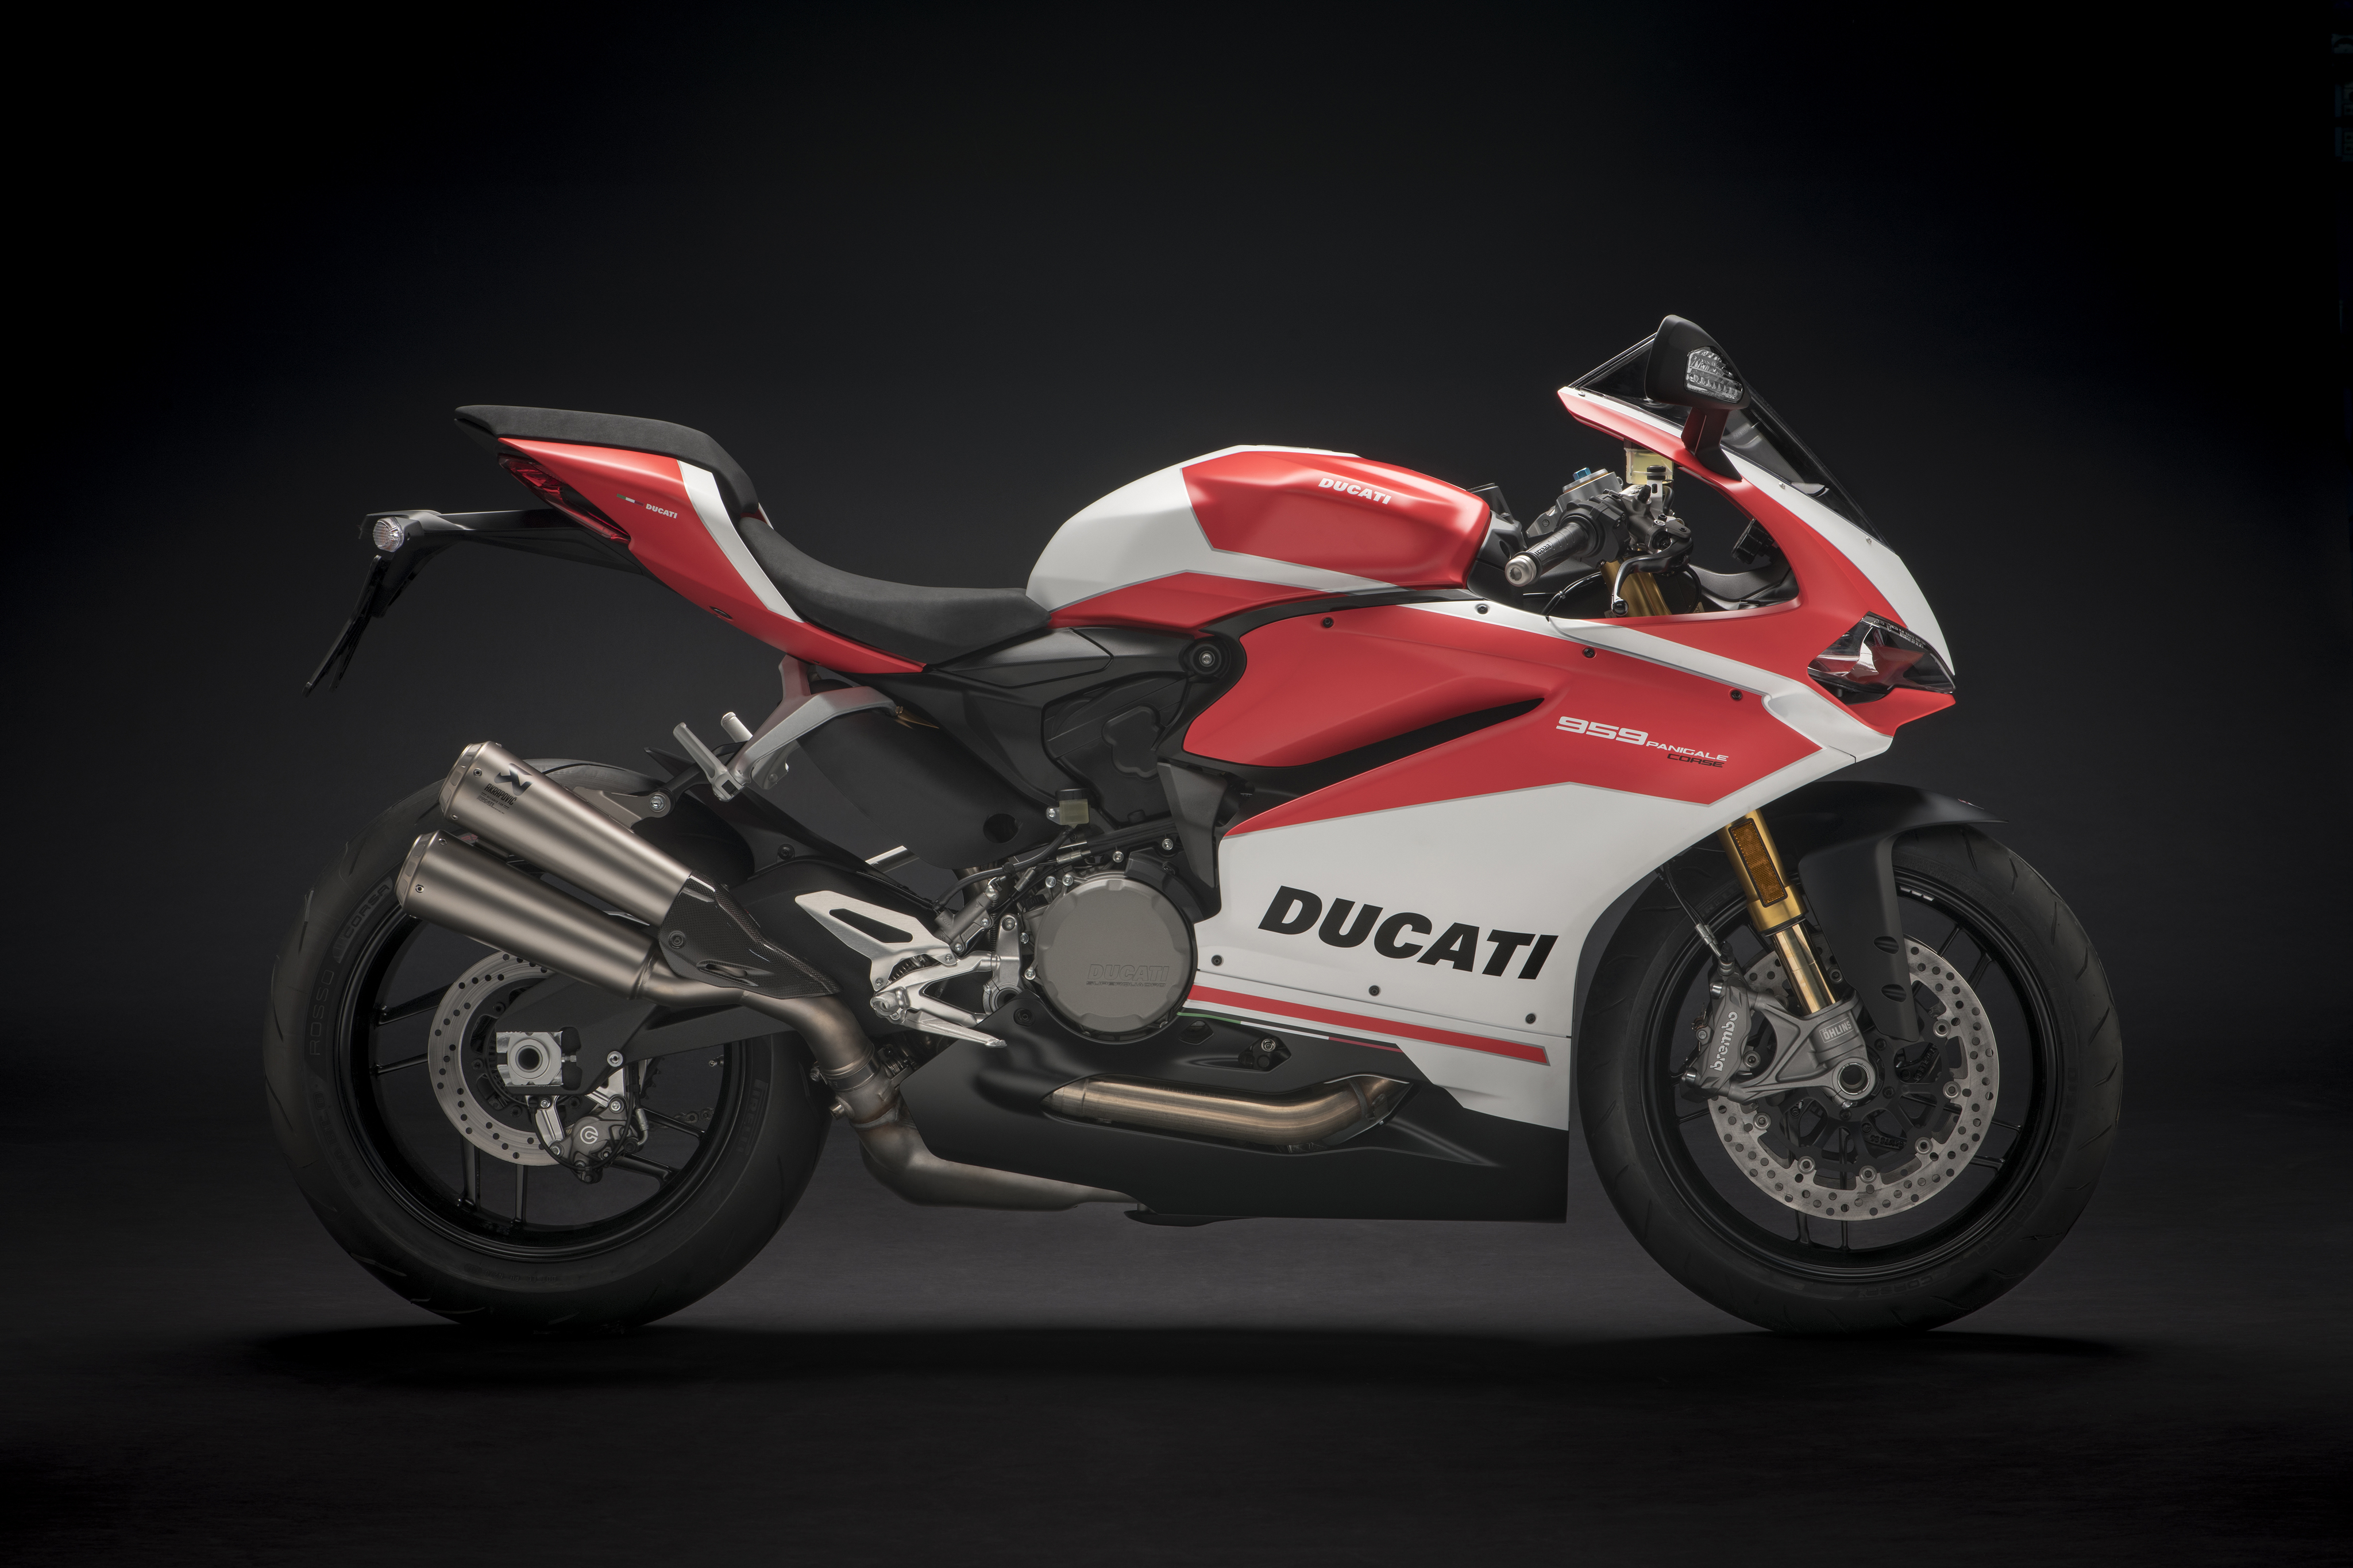 Ducati Panigale side view